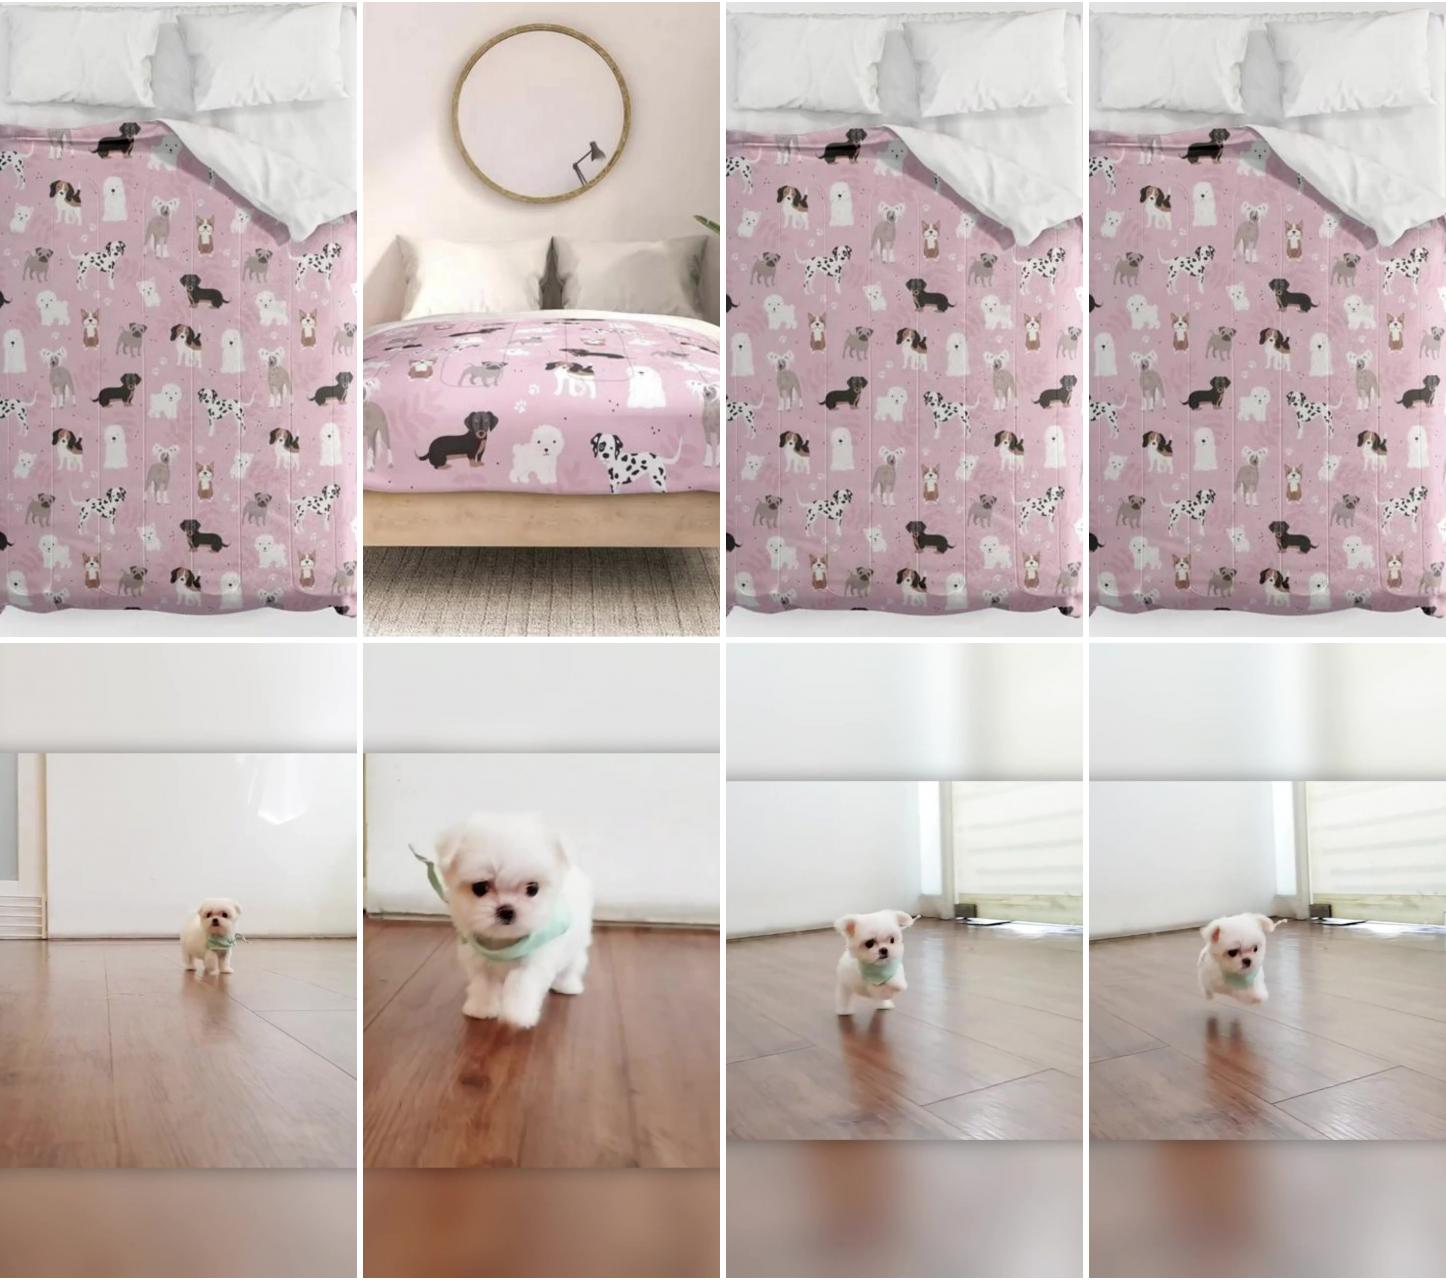 Sweet puppies on pink comforter; fluffy white puppy is having a happy happy day